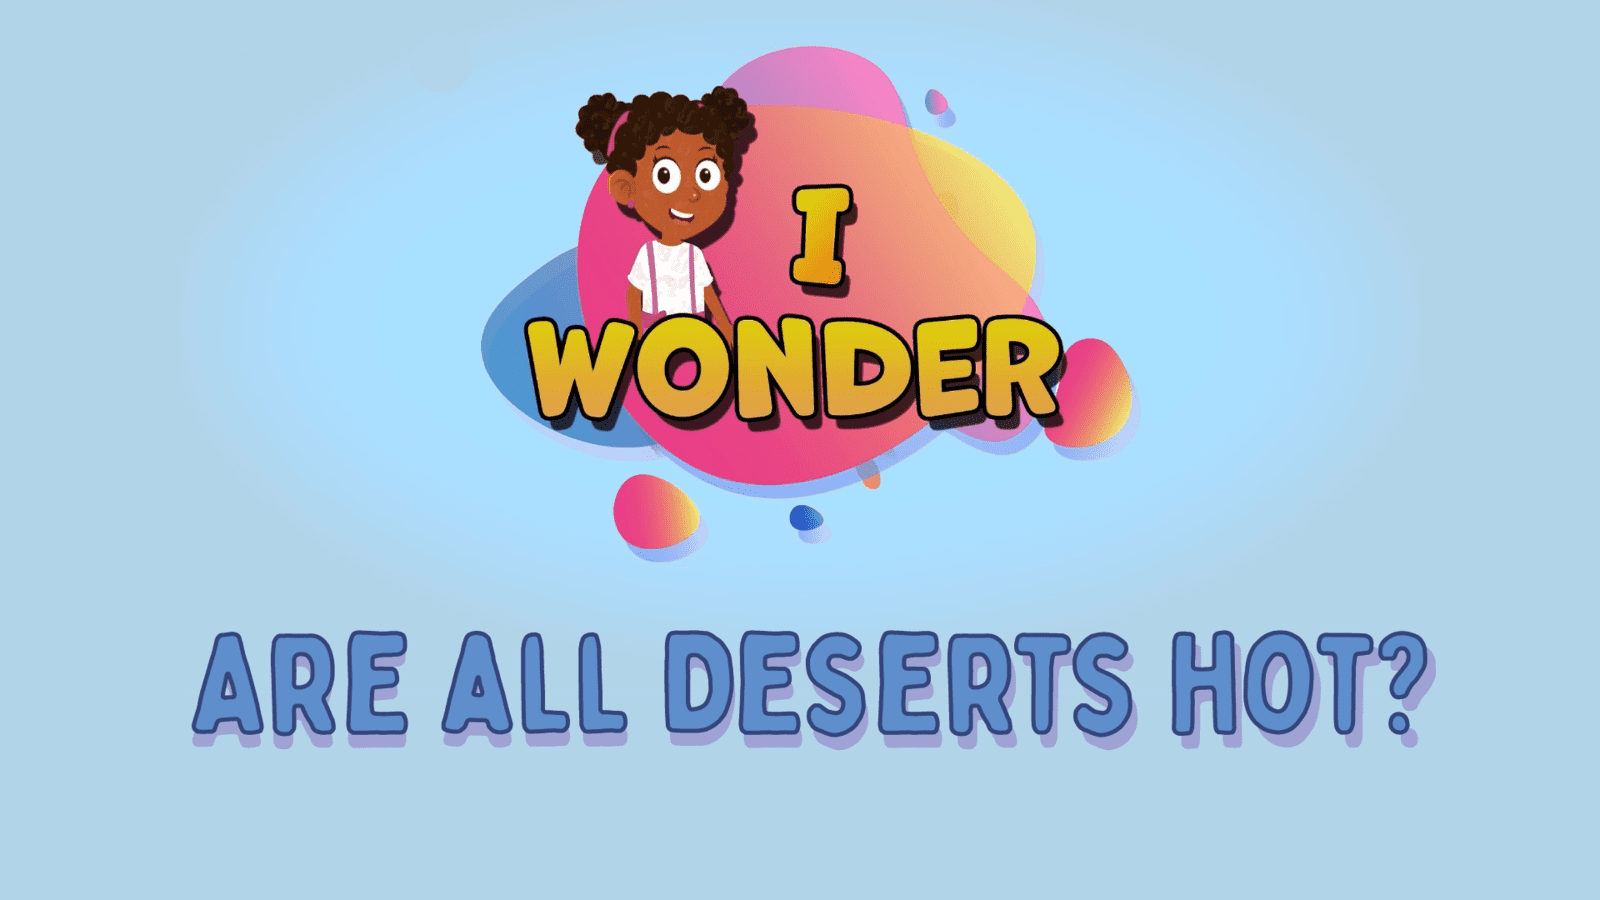 Are All Deserts Hot?